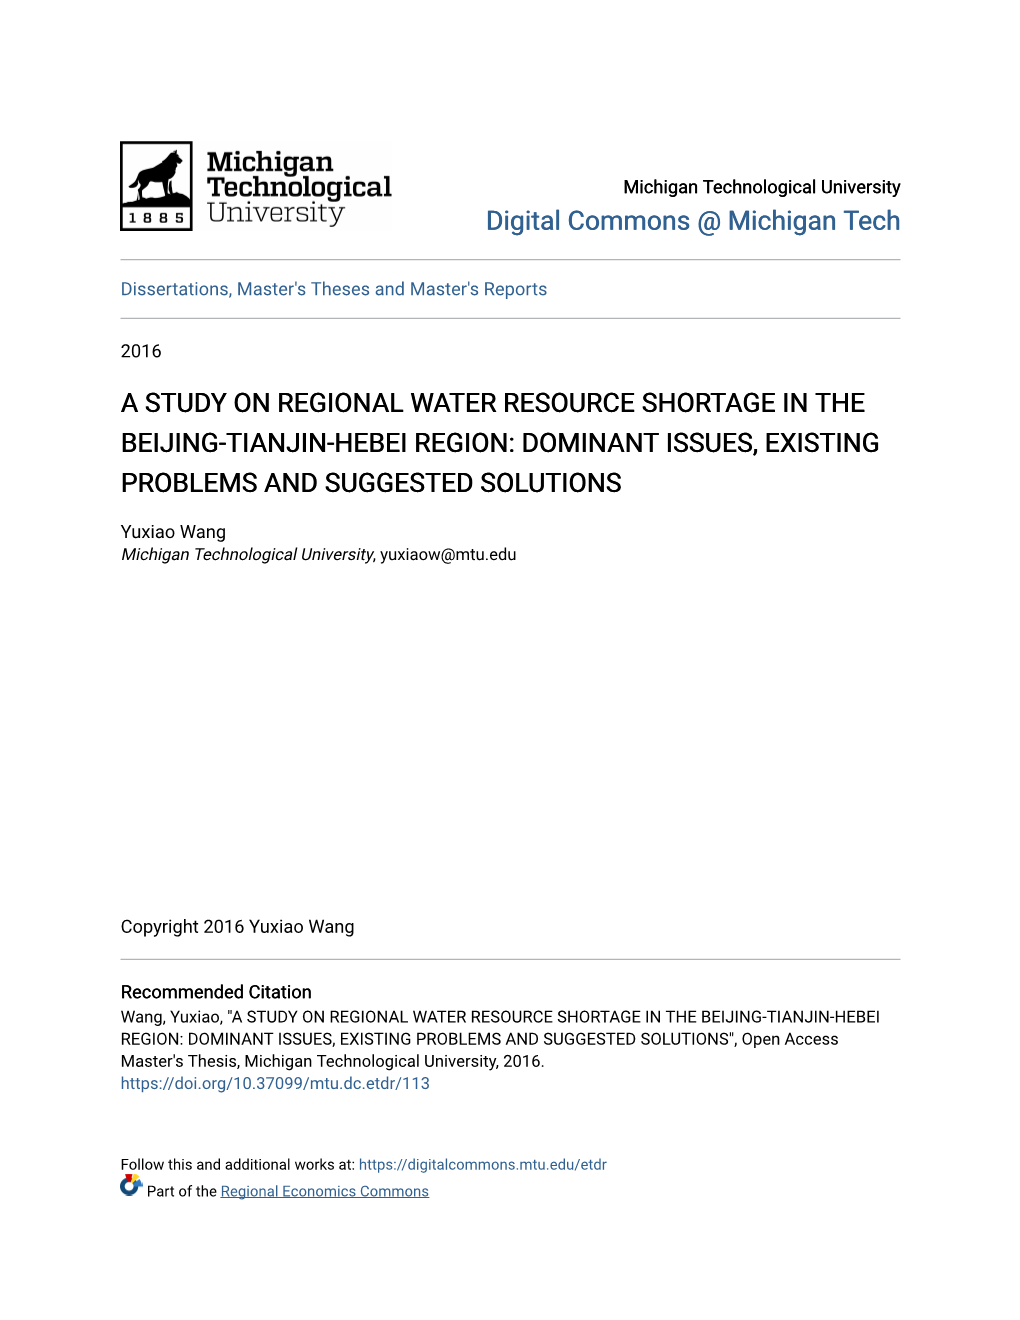 A Study on Regional Water Resource Shortage in the Beijing-Tianjin-Hebei Region: Dominant Issues, Existing Problems and Suggested Solutions